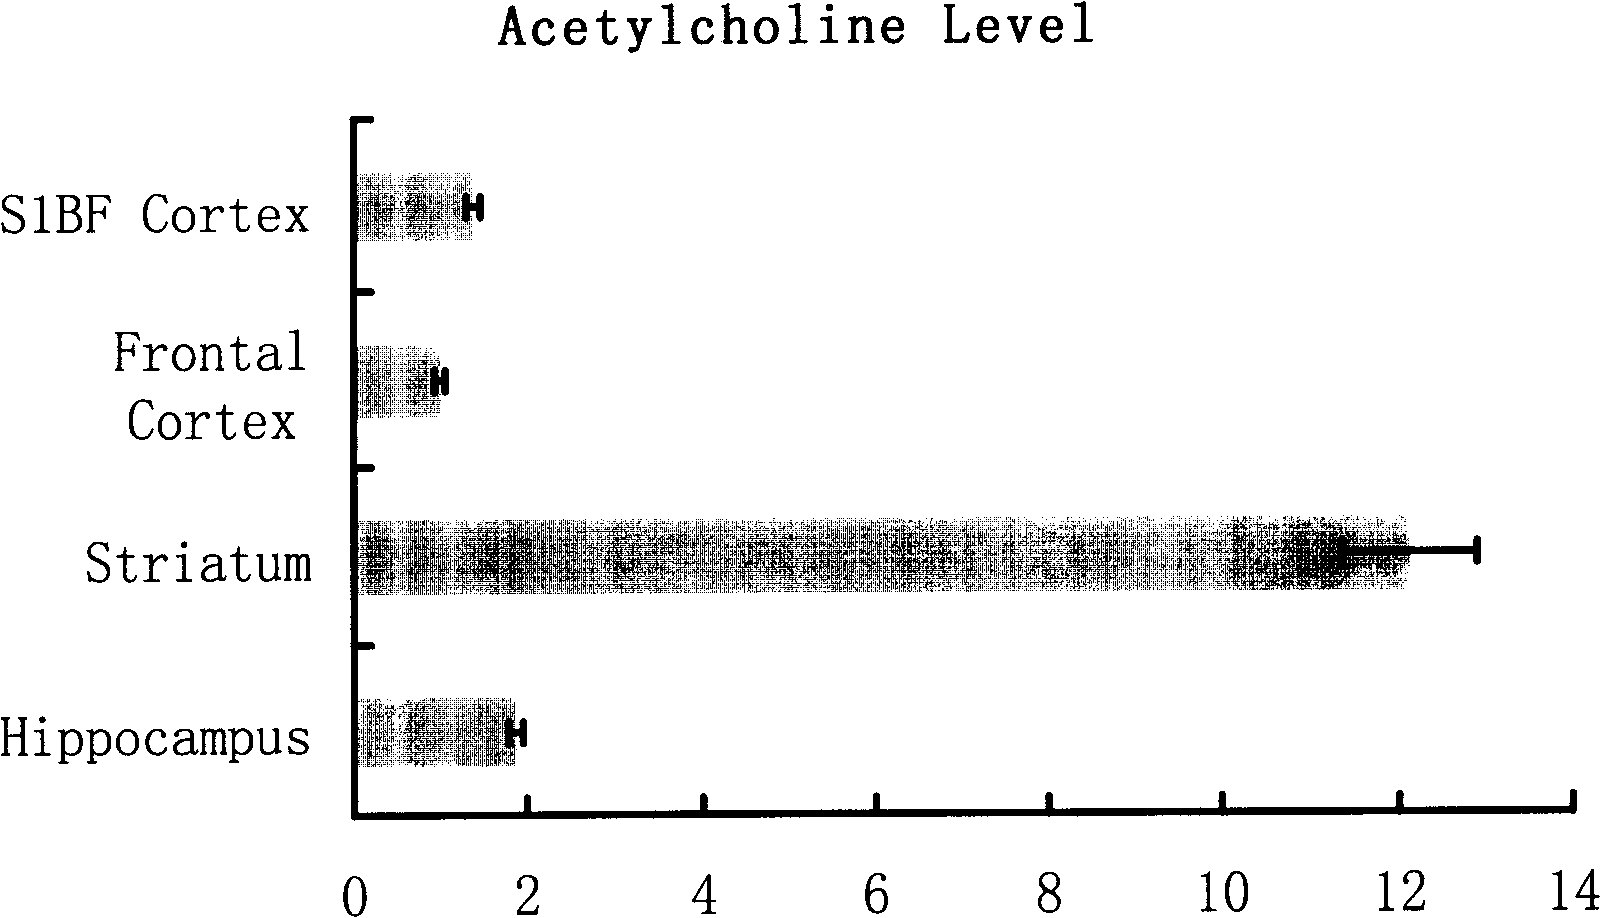 Method for acetyl choline content indirect detection by proton magnetic resonance wave spectrum analysis